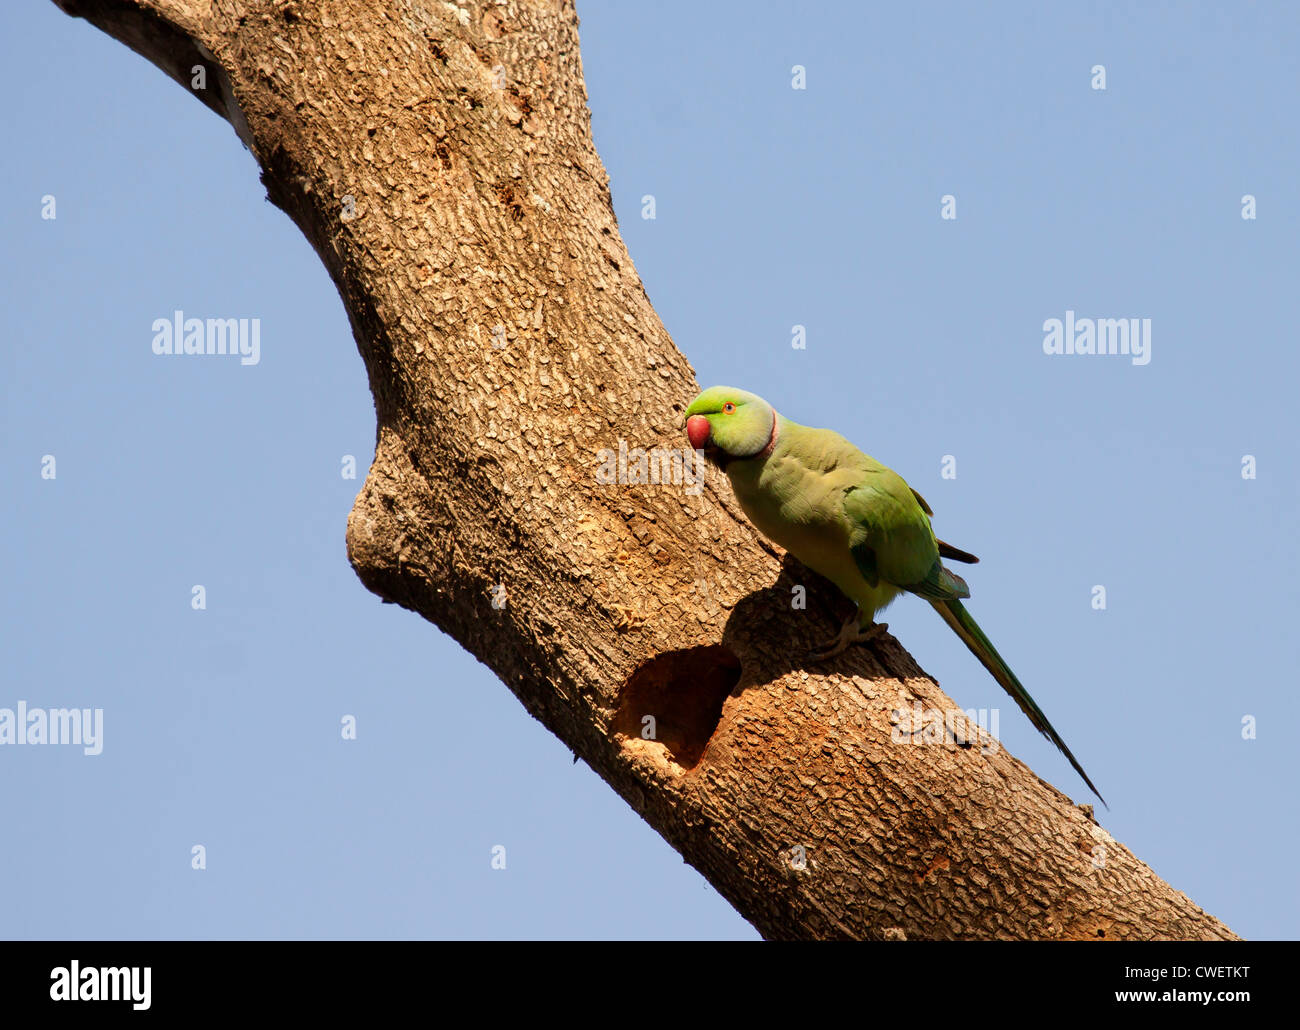 'The Rose-ringed Parakeet (Psittacula krameri), also known as the Ringnecked Parakeet, is a gregarious tropical parakeet species Stock Photo